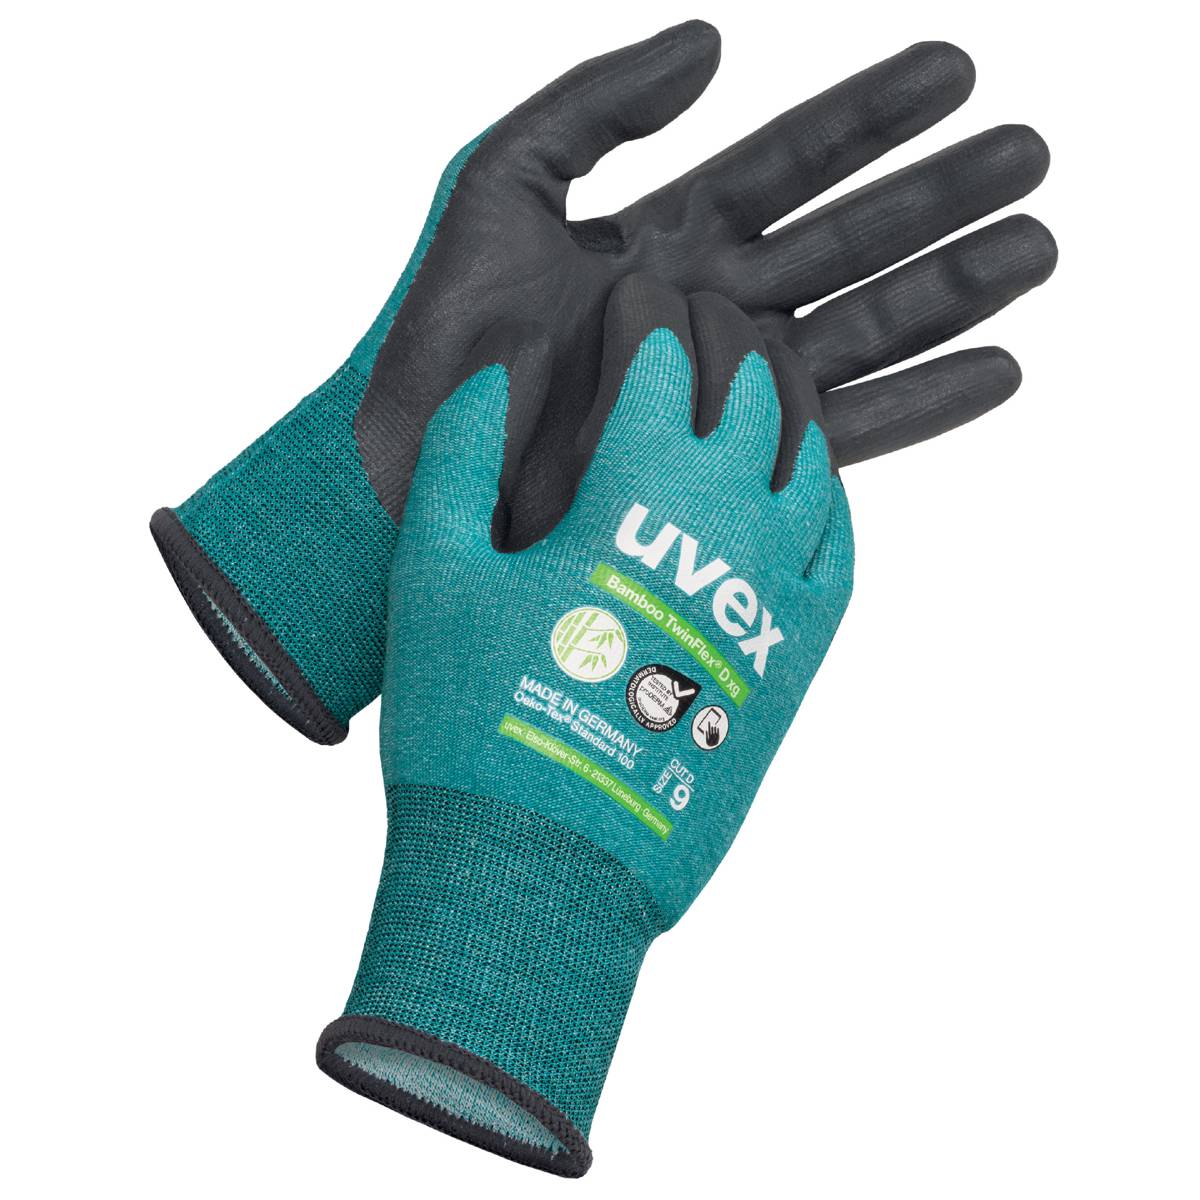 Bamboo Sustainable Safety Gloves combine Cut Protection and Comfort